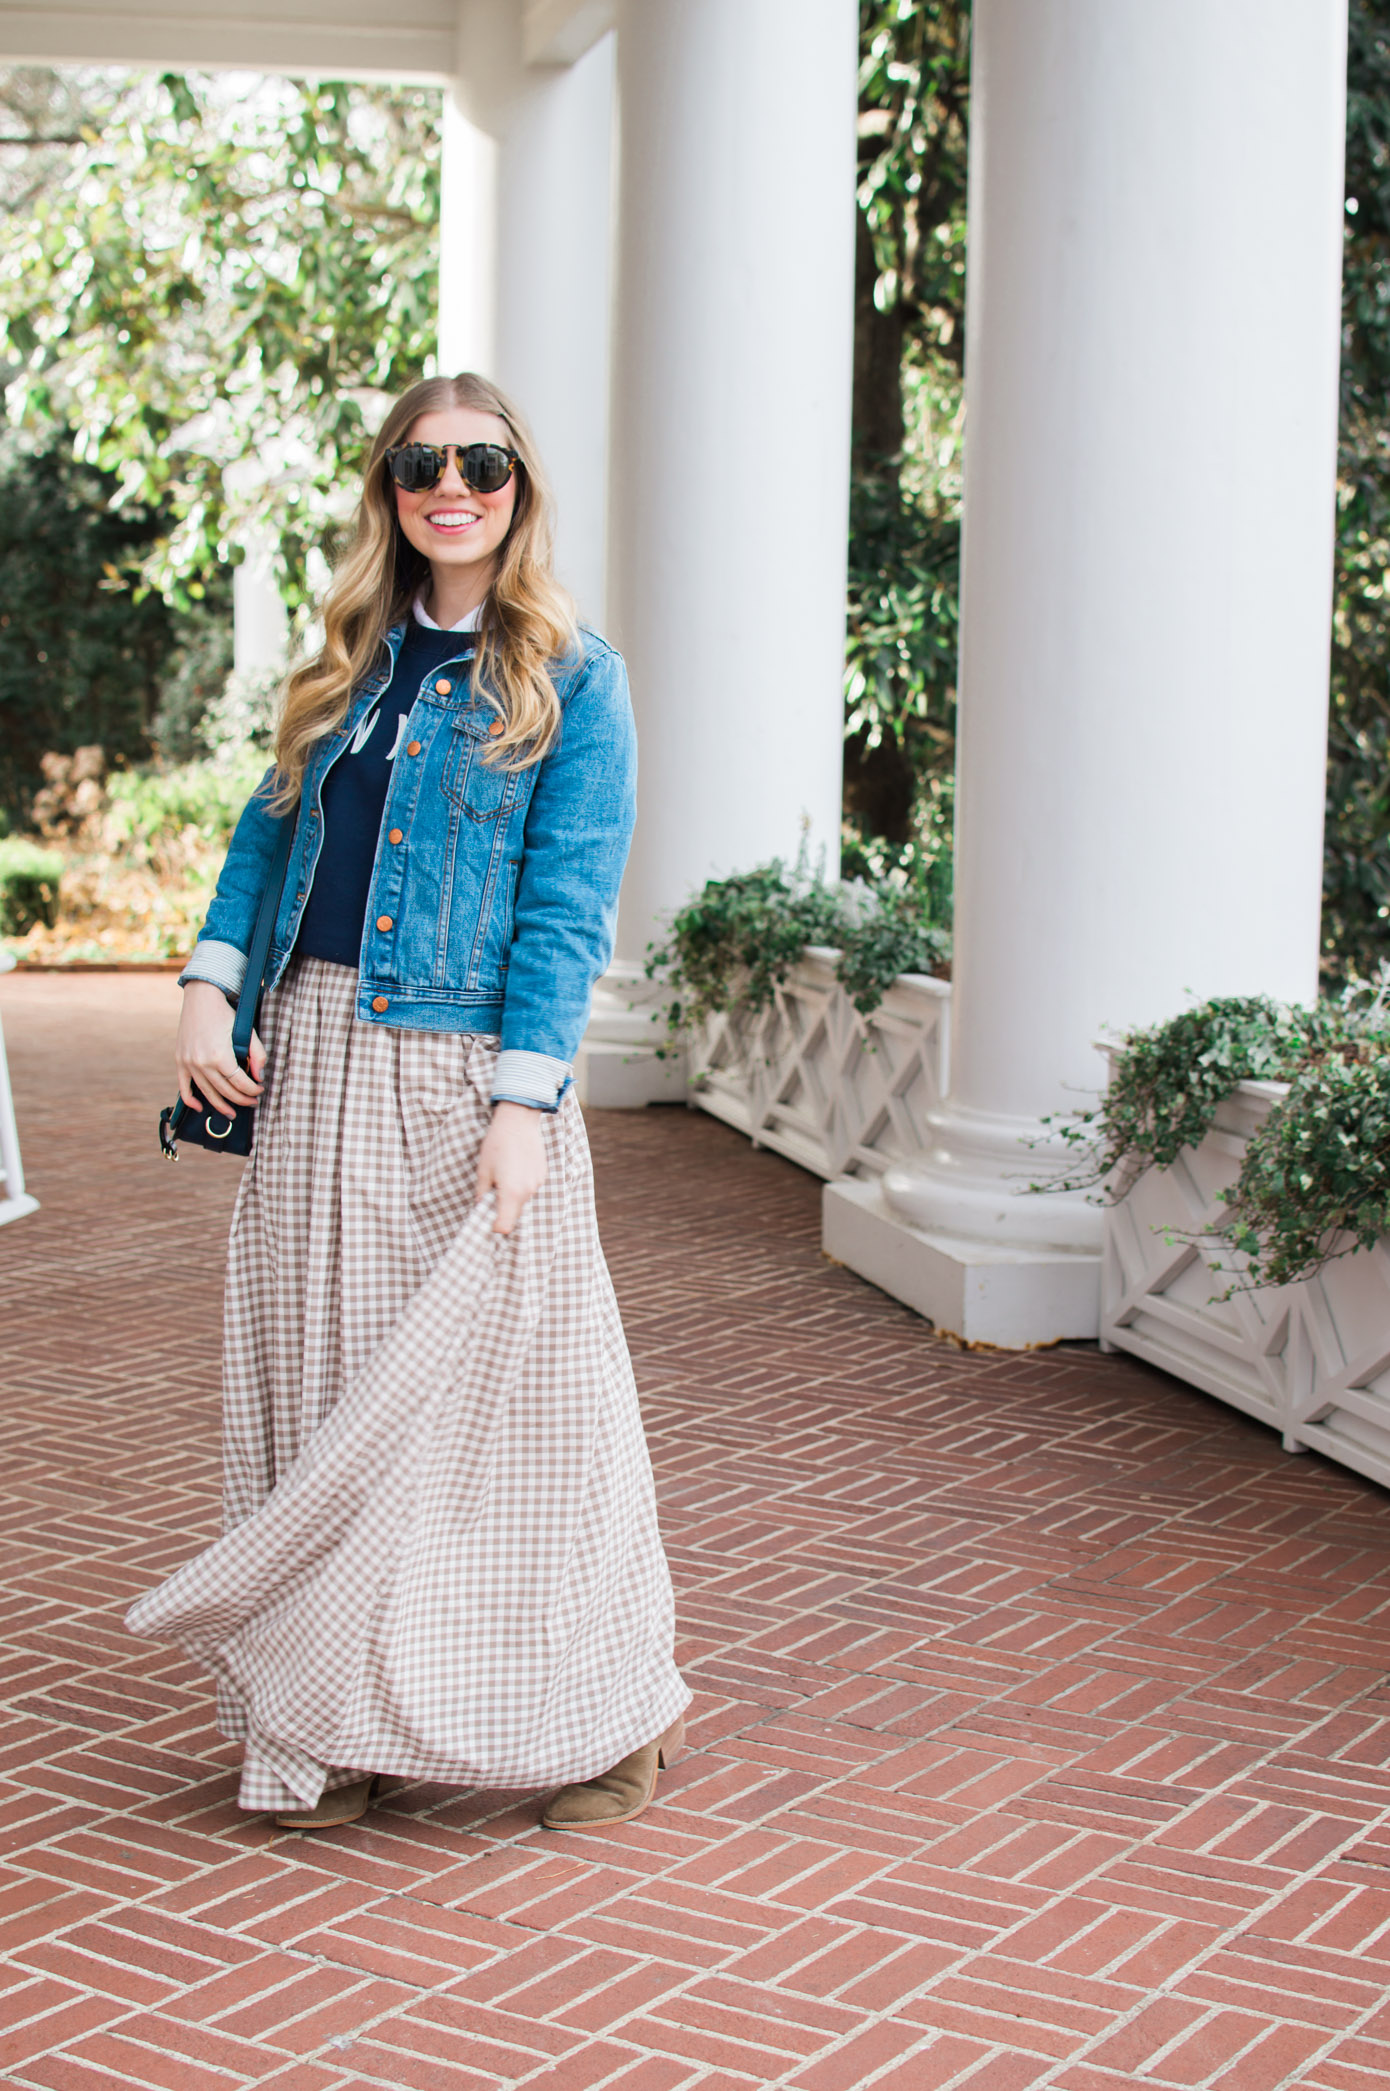 How to Style a Maxi Denim Skirt — NOW MAGAZINE